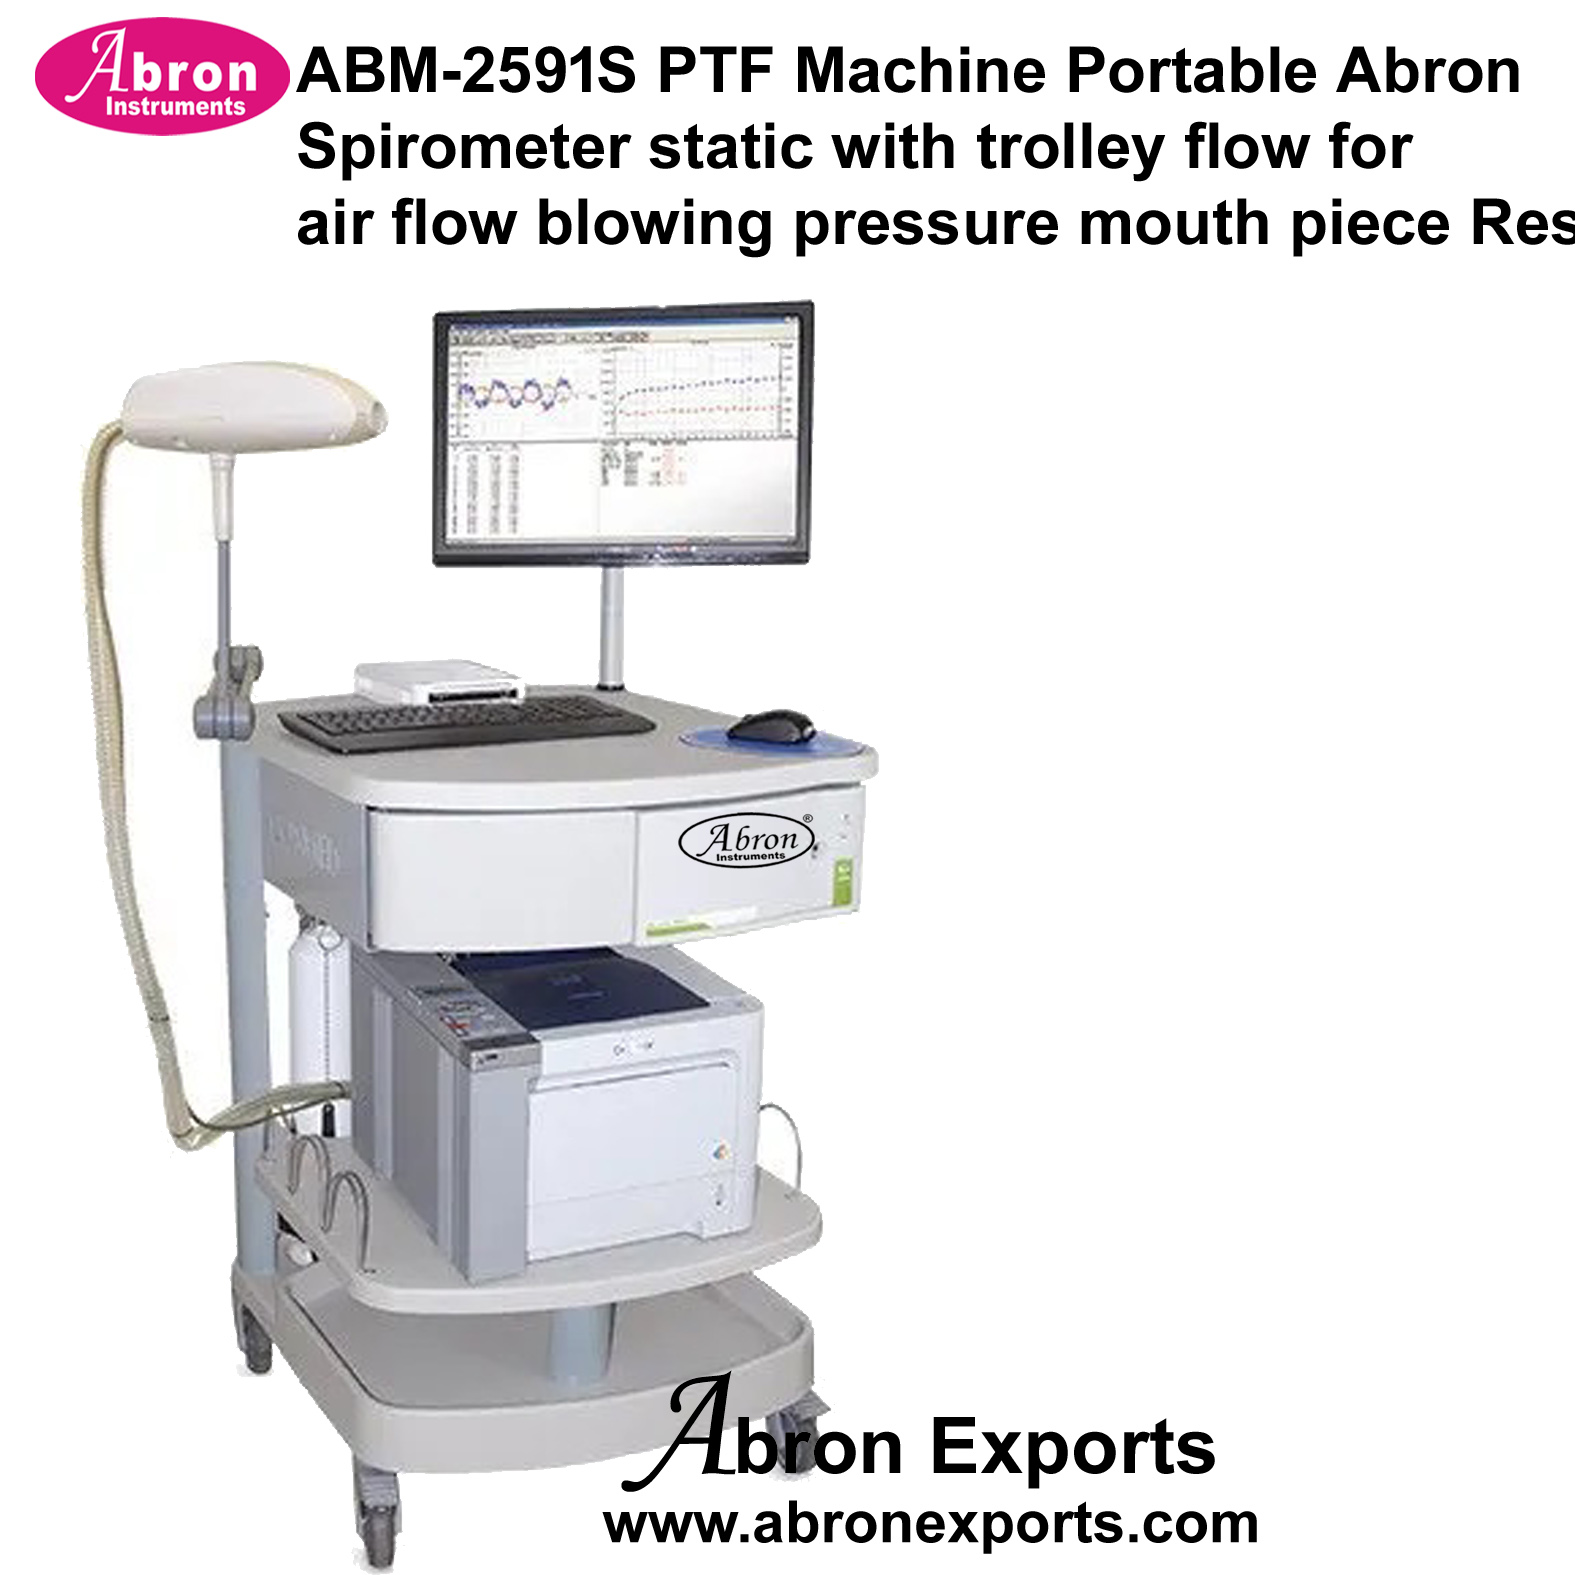 PFT Machine Portable Spirometer Static With Trolley Flow for Air Flow Blowing Pressure Respirometer Hospital ABM-2591S 